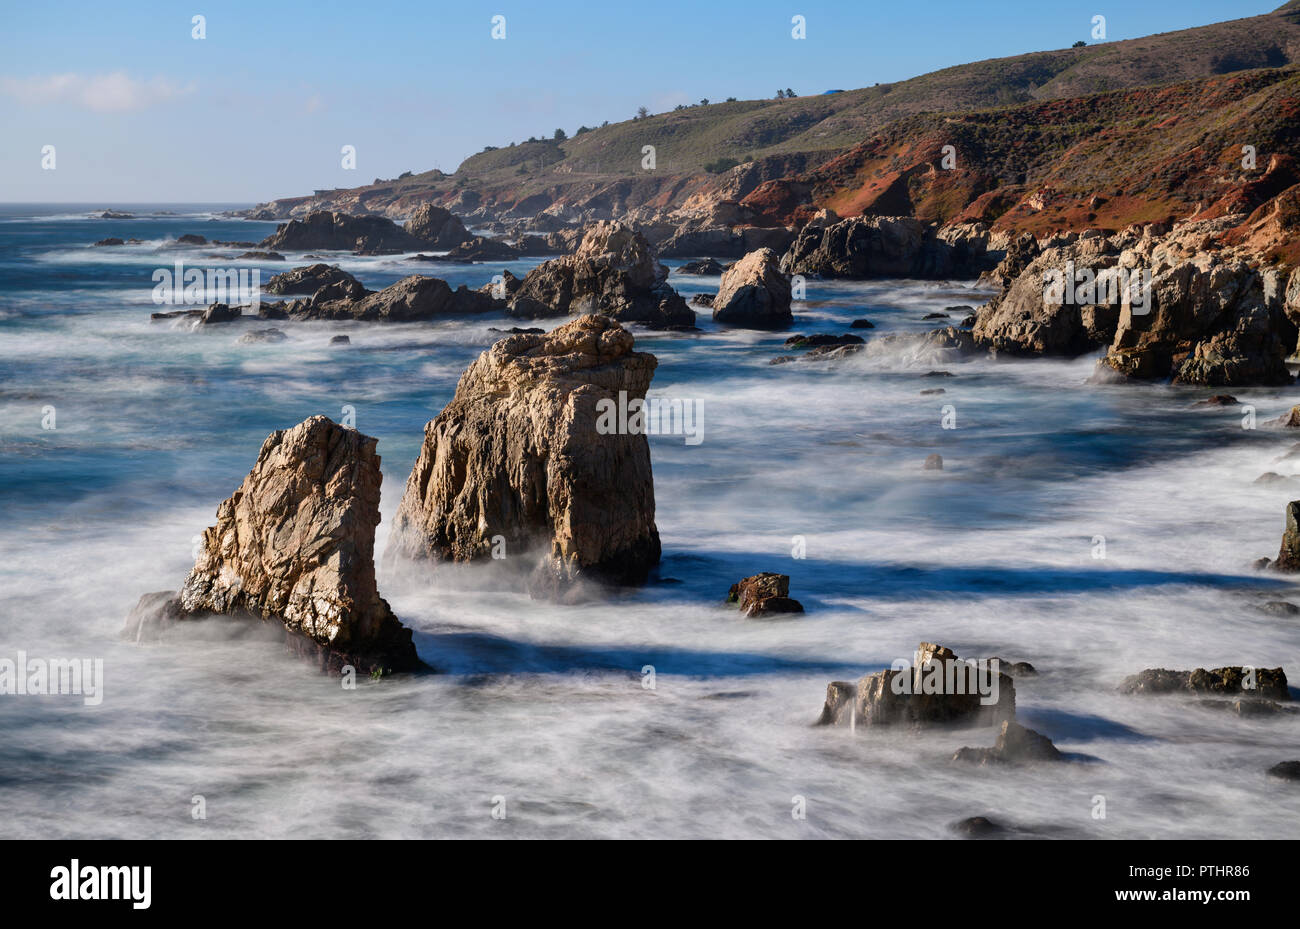 Sea stacks in the Pacific Ocean along the big sur coast on highway 1, CA, USA Stock Photo